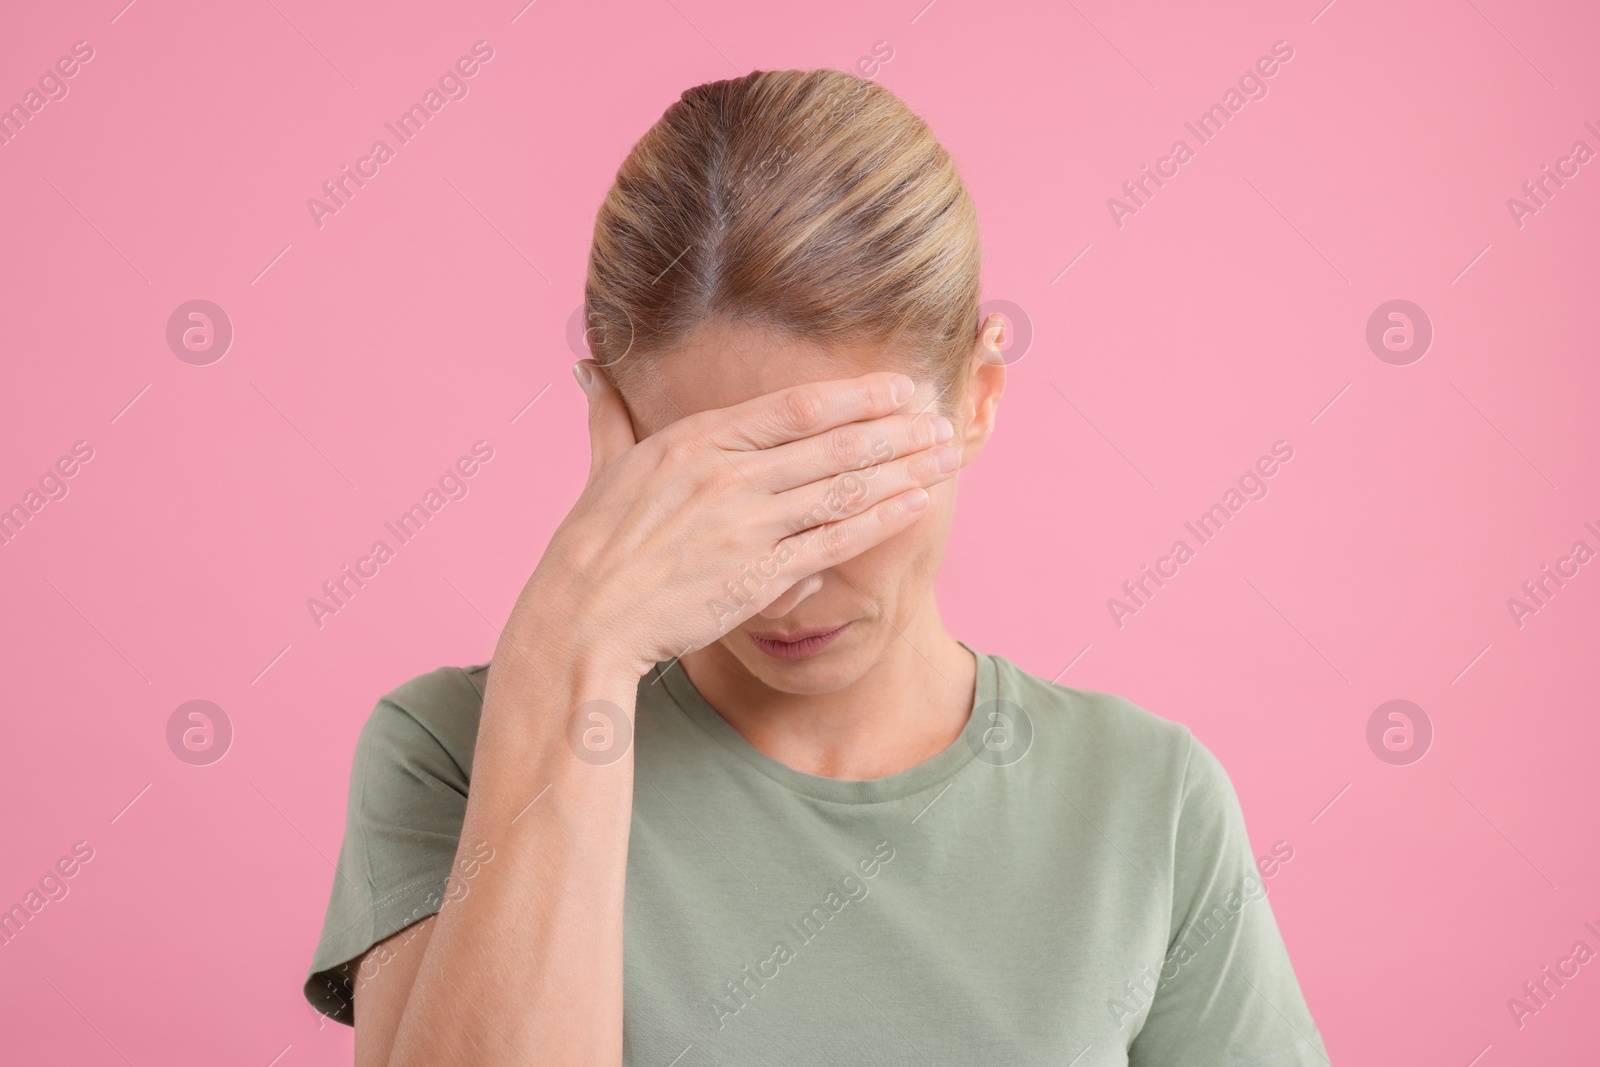 Photo of Embarrassed woman covering eyes on pink background